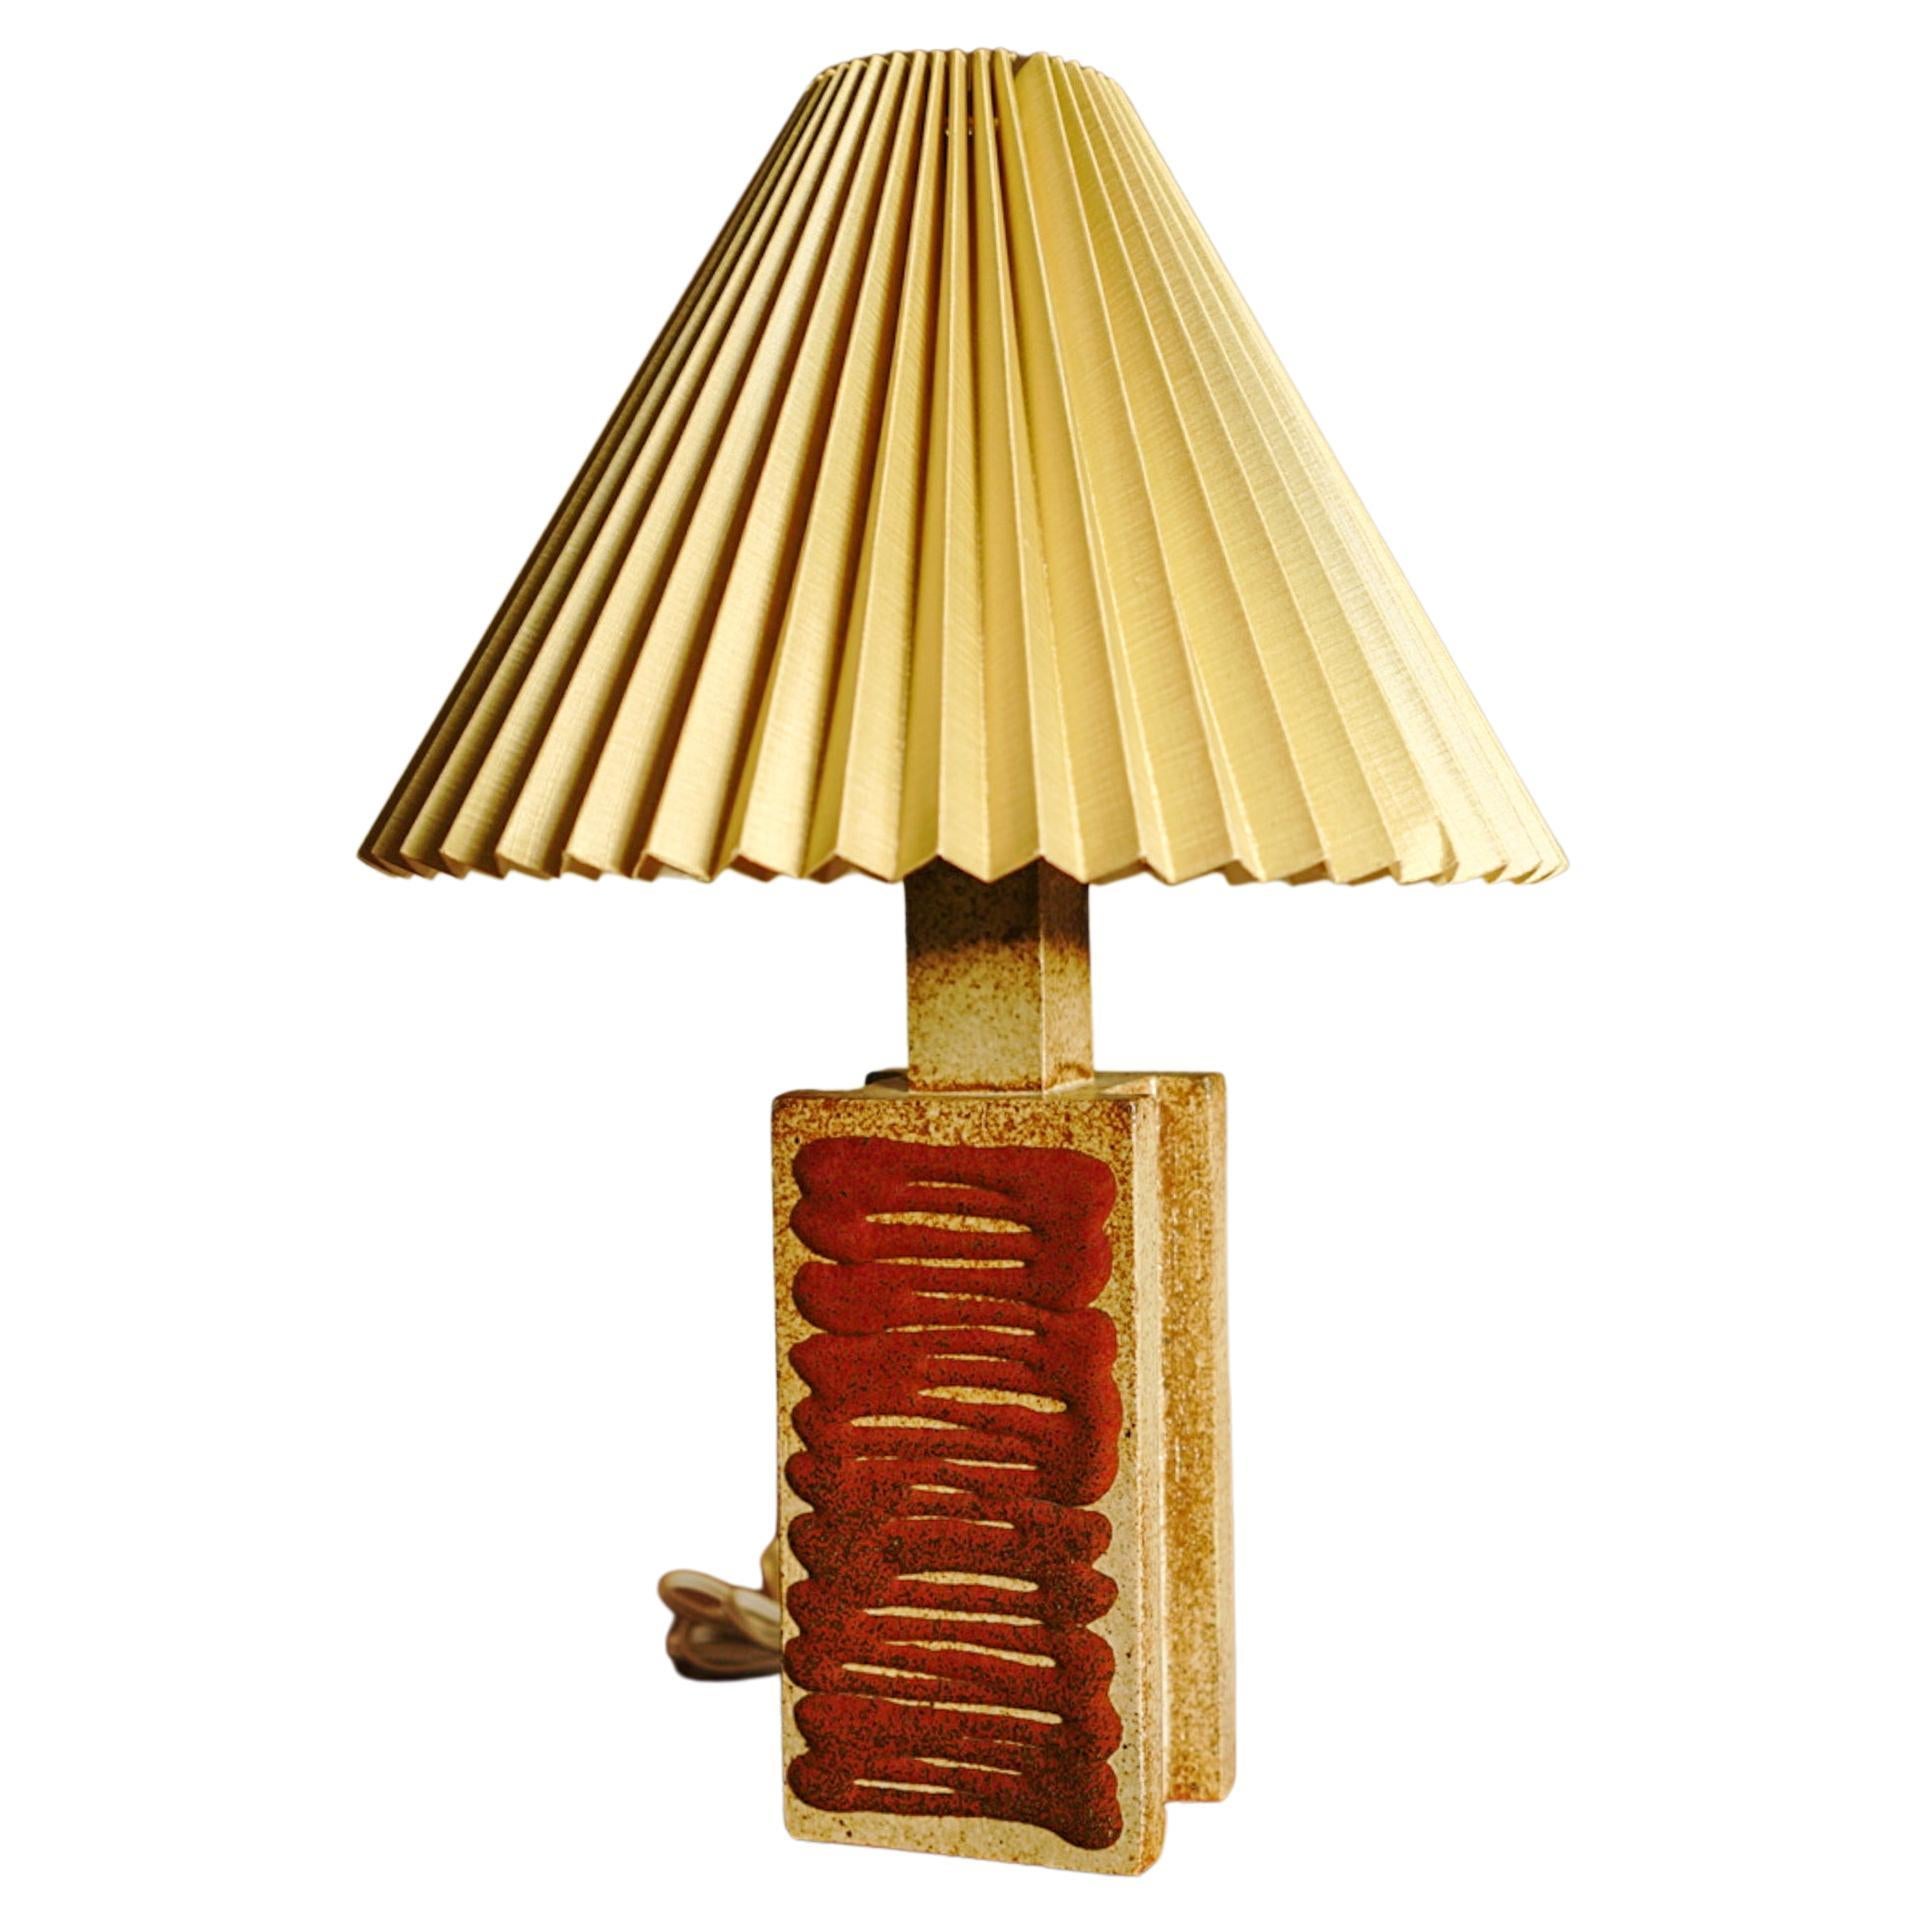 Midcentury tall table lamp from Danish Palshus.
The lamp was designed by Per Linnemann-Schmidt and produced, circa 1960s.

Fully marked on bottom. length incl socket.

Lightbulb: For type E26/E27 Edison screw-fitting.
The lamp is made for